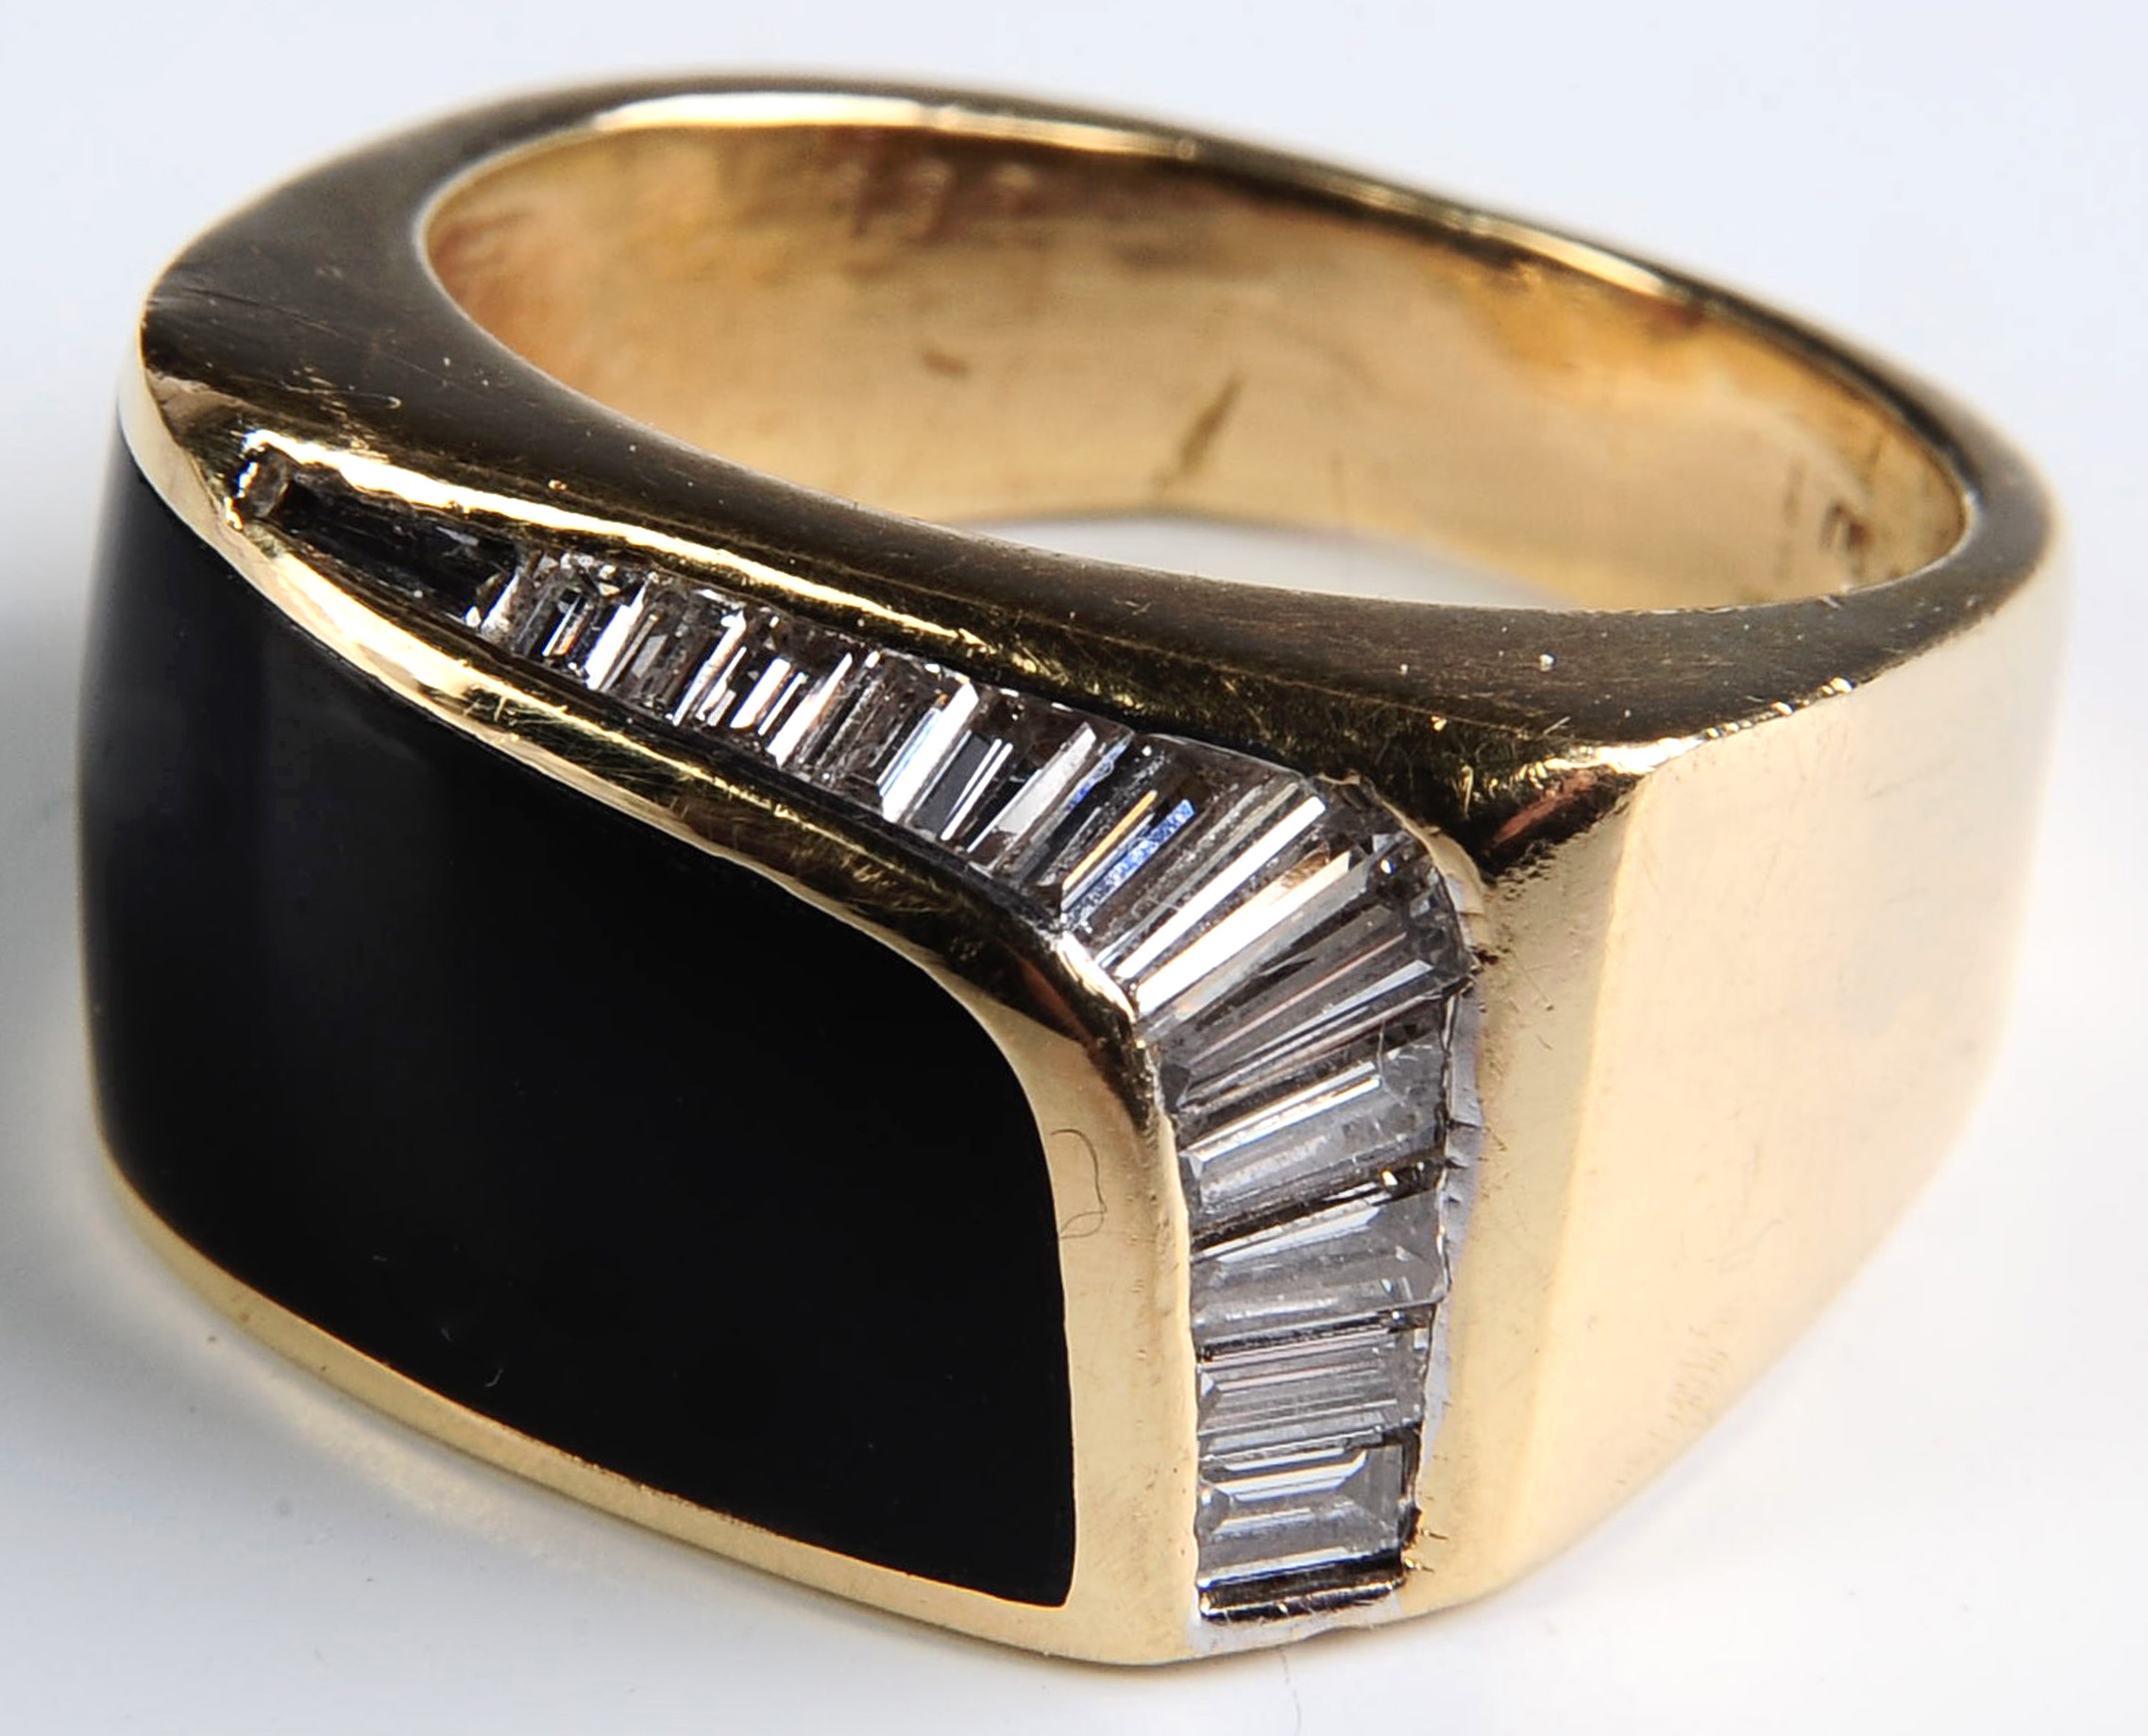 A GENT'S 18K GOLD ONYX AND BAGUETTE DIAMOND RING